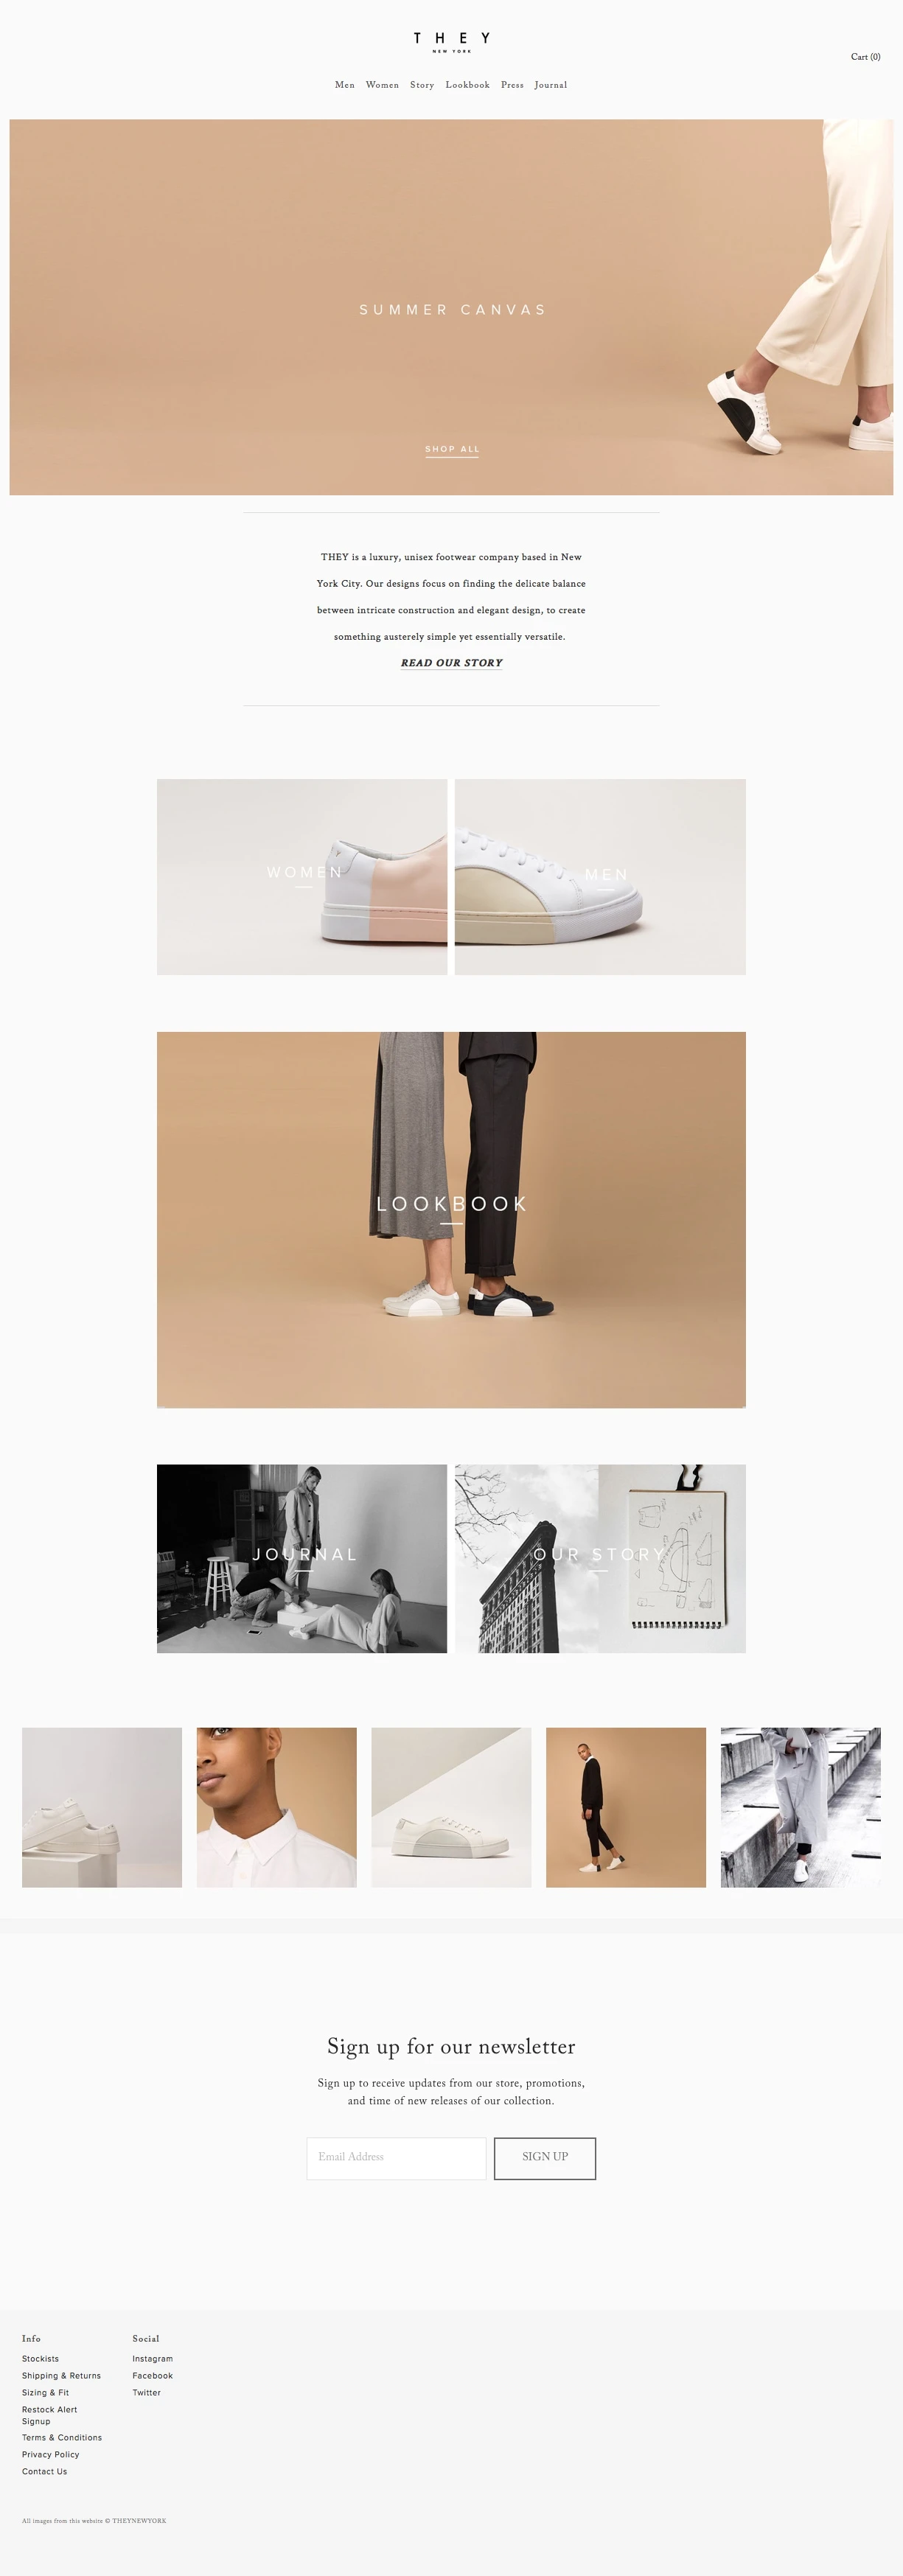 THEY NEW YORK Landing Page Example: Minimalistic unisex sneaker label handcrafted with custom-developed construction methods to ensure a seamless presentation. Inspired by finding the beauty in simplicity through sophisticated design.